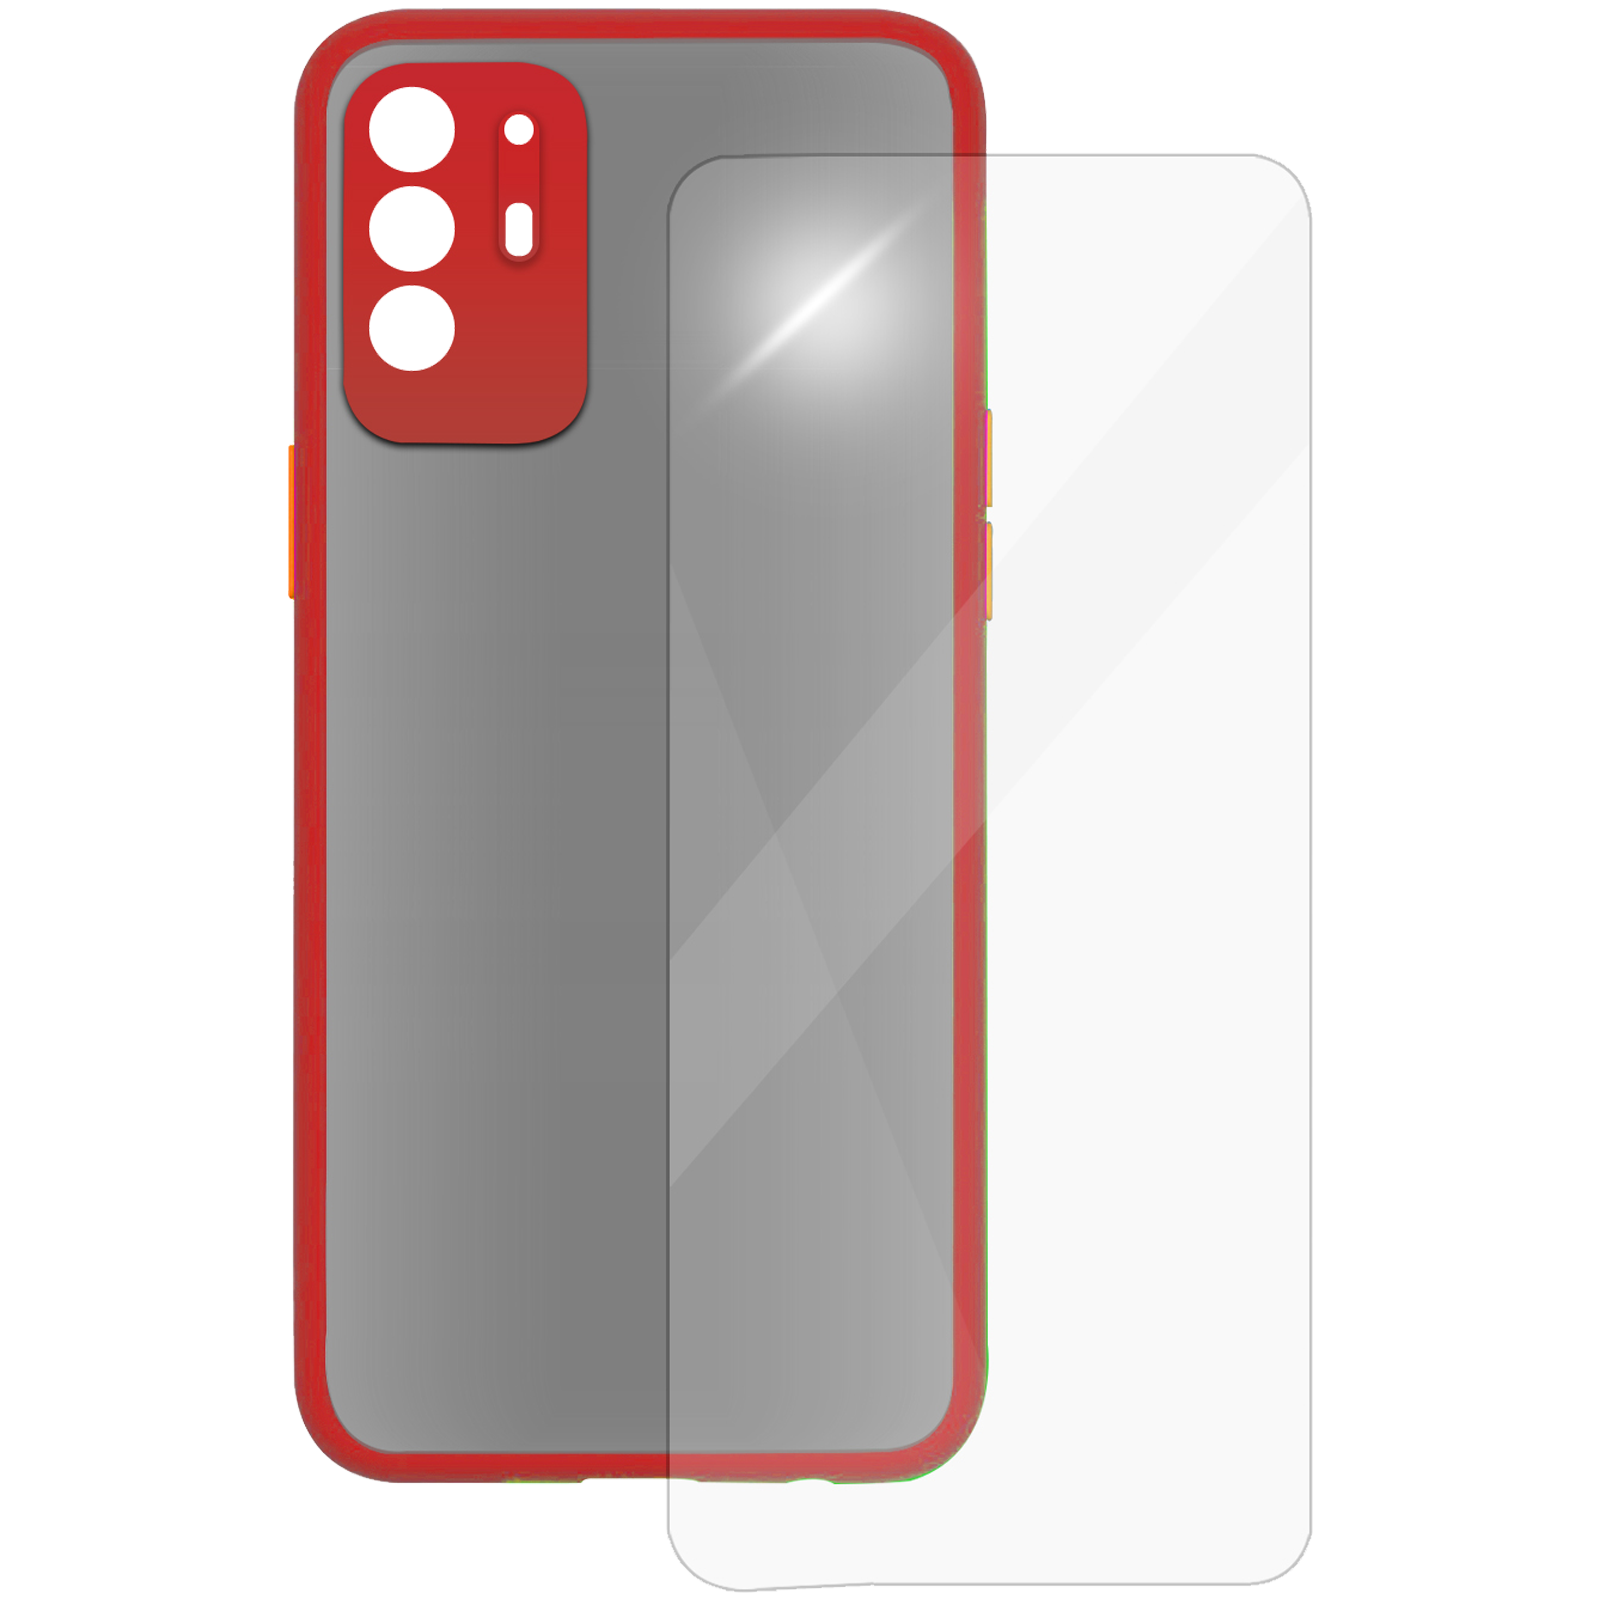 arrow - Arrow Camera Duplex Back Case and Screen Protector Bundle For Oppo India F19 Pro+ (Ultra Transparent Visibility, AR-990, Red)